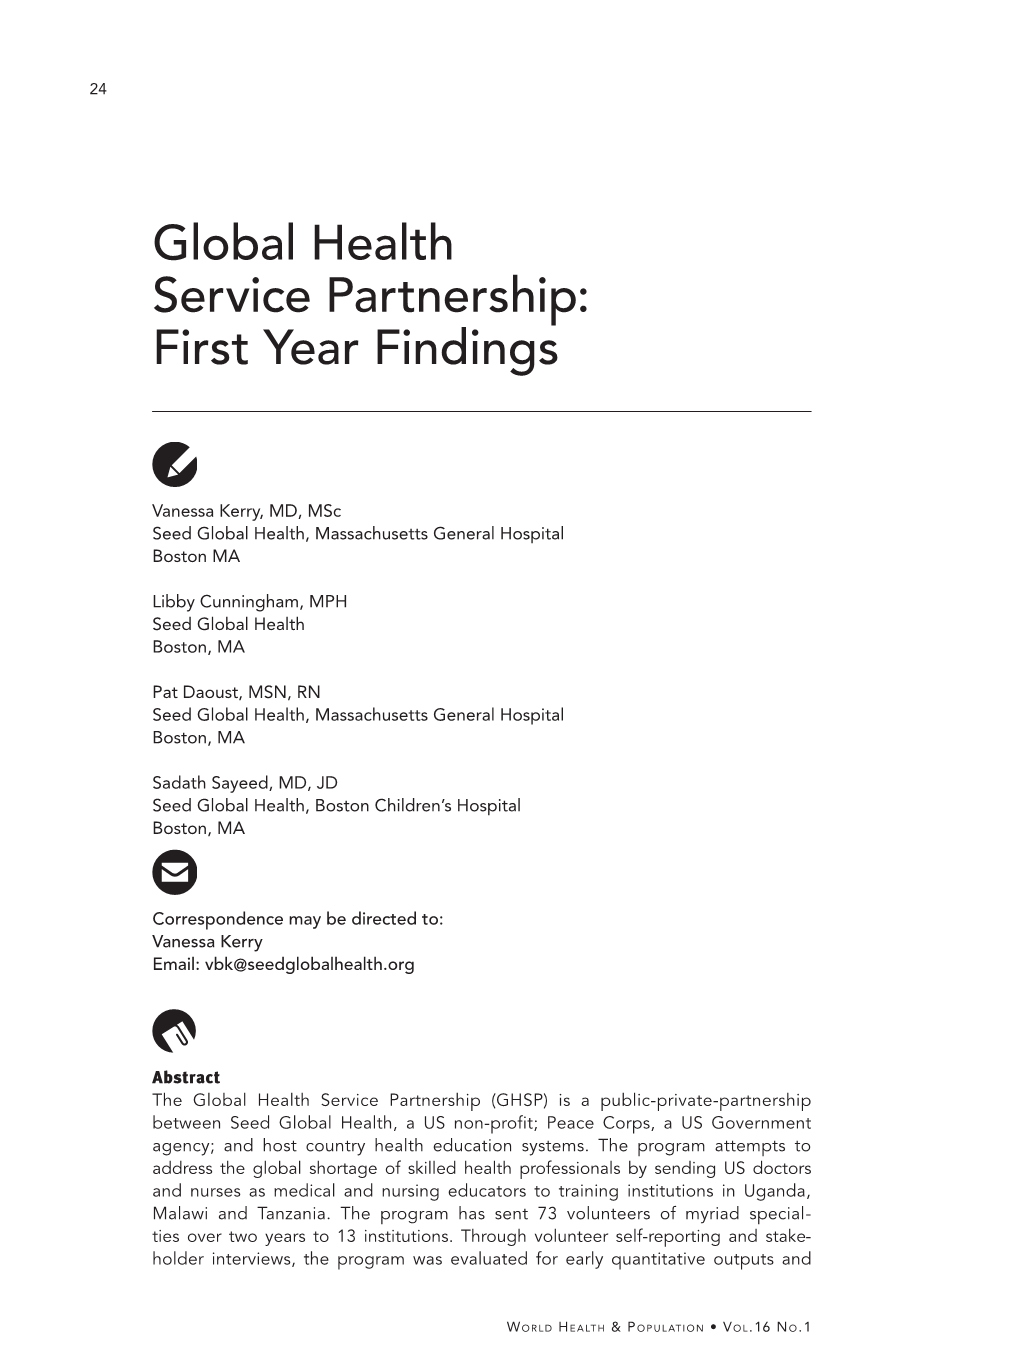 Global Health Service Partnership: First Year Findings